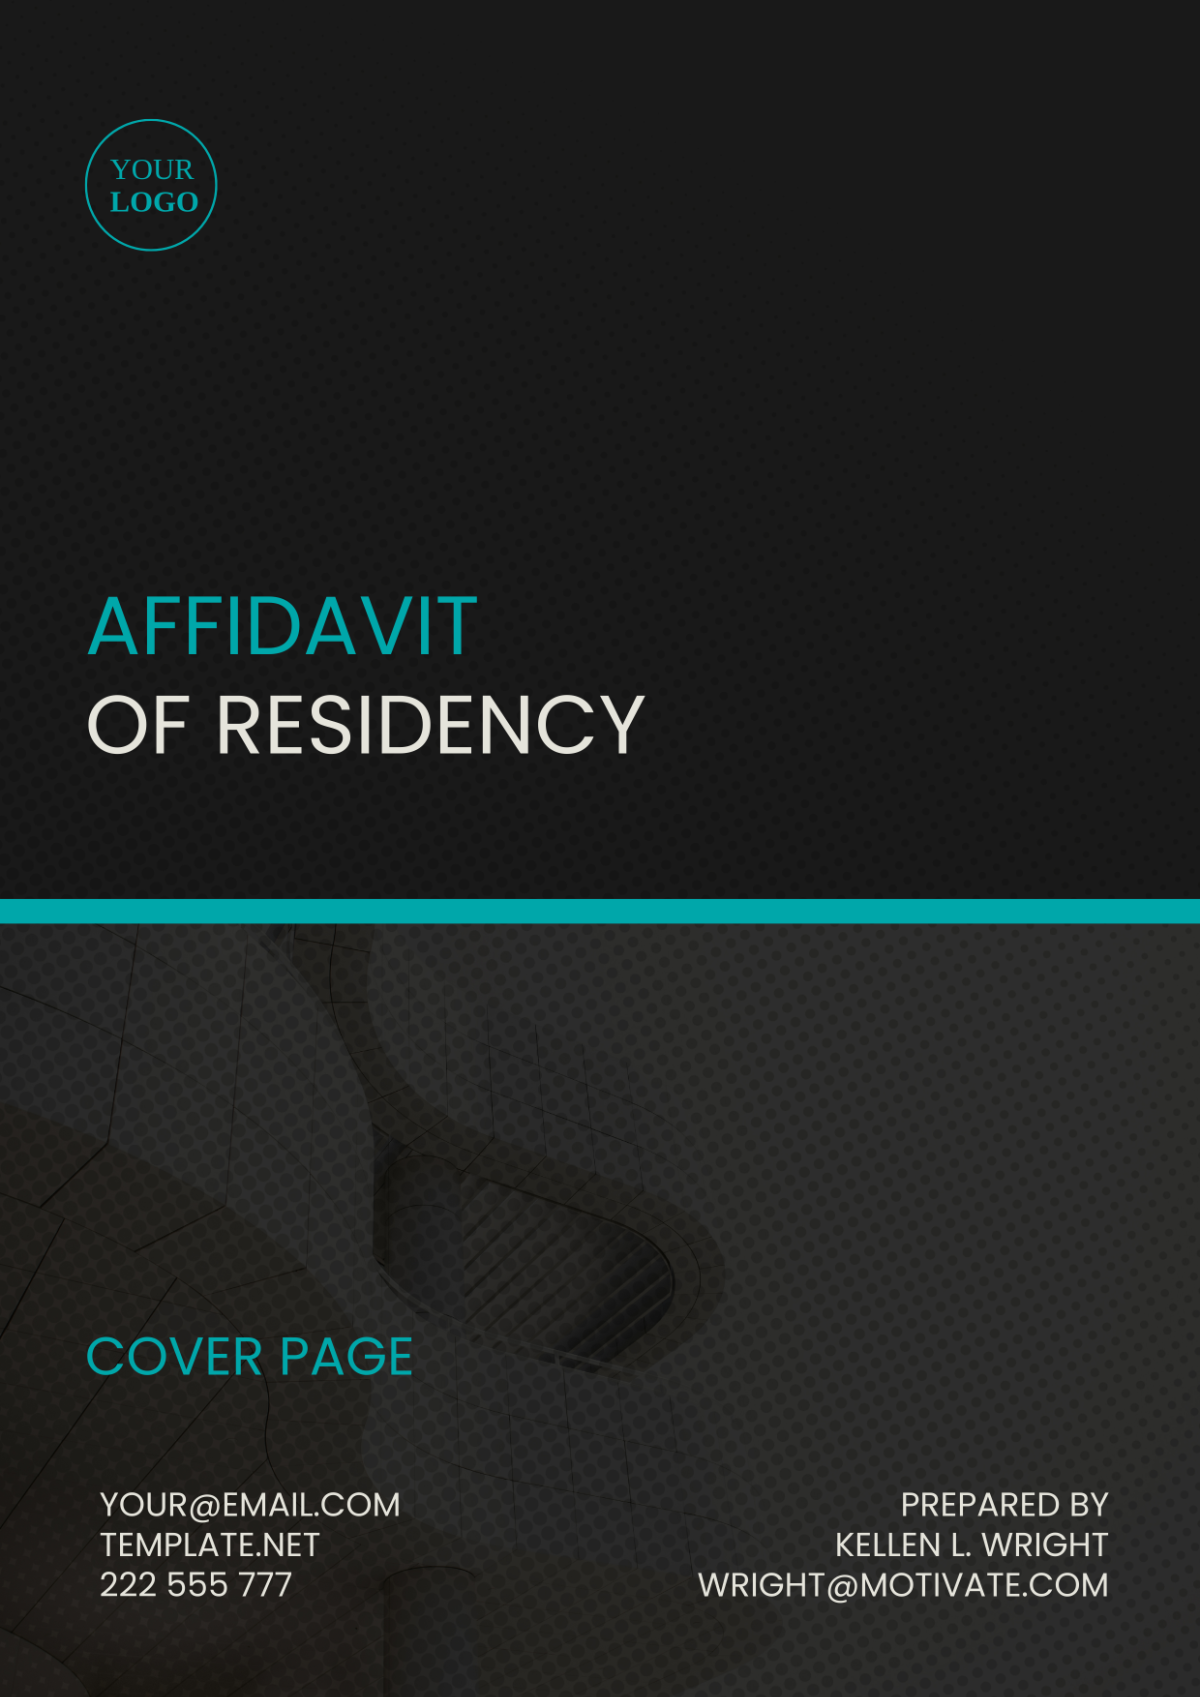 Affidavit of Residency Cover Page Template